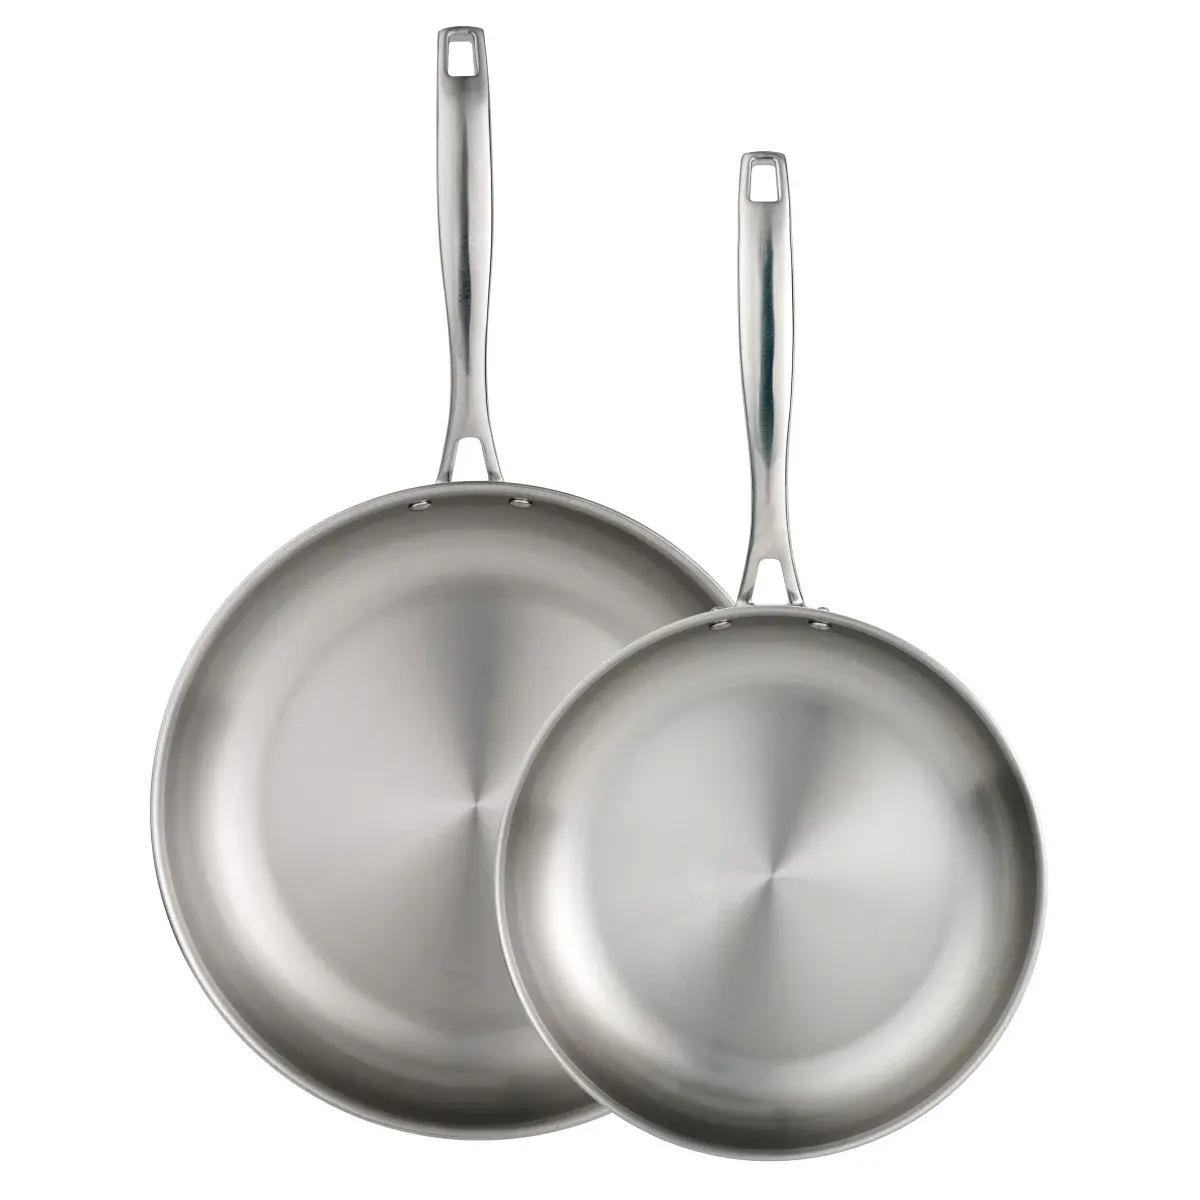 Tramontina Tri-Ply Clad 2-Piece Stainless Steel Fry Pan Set for $22.97 Shipped